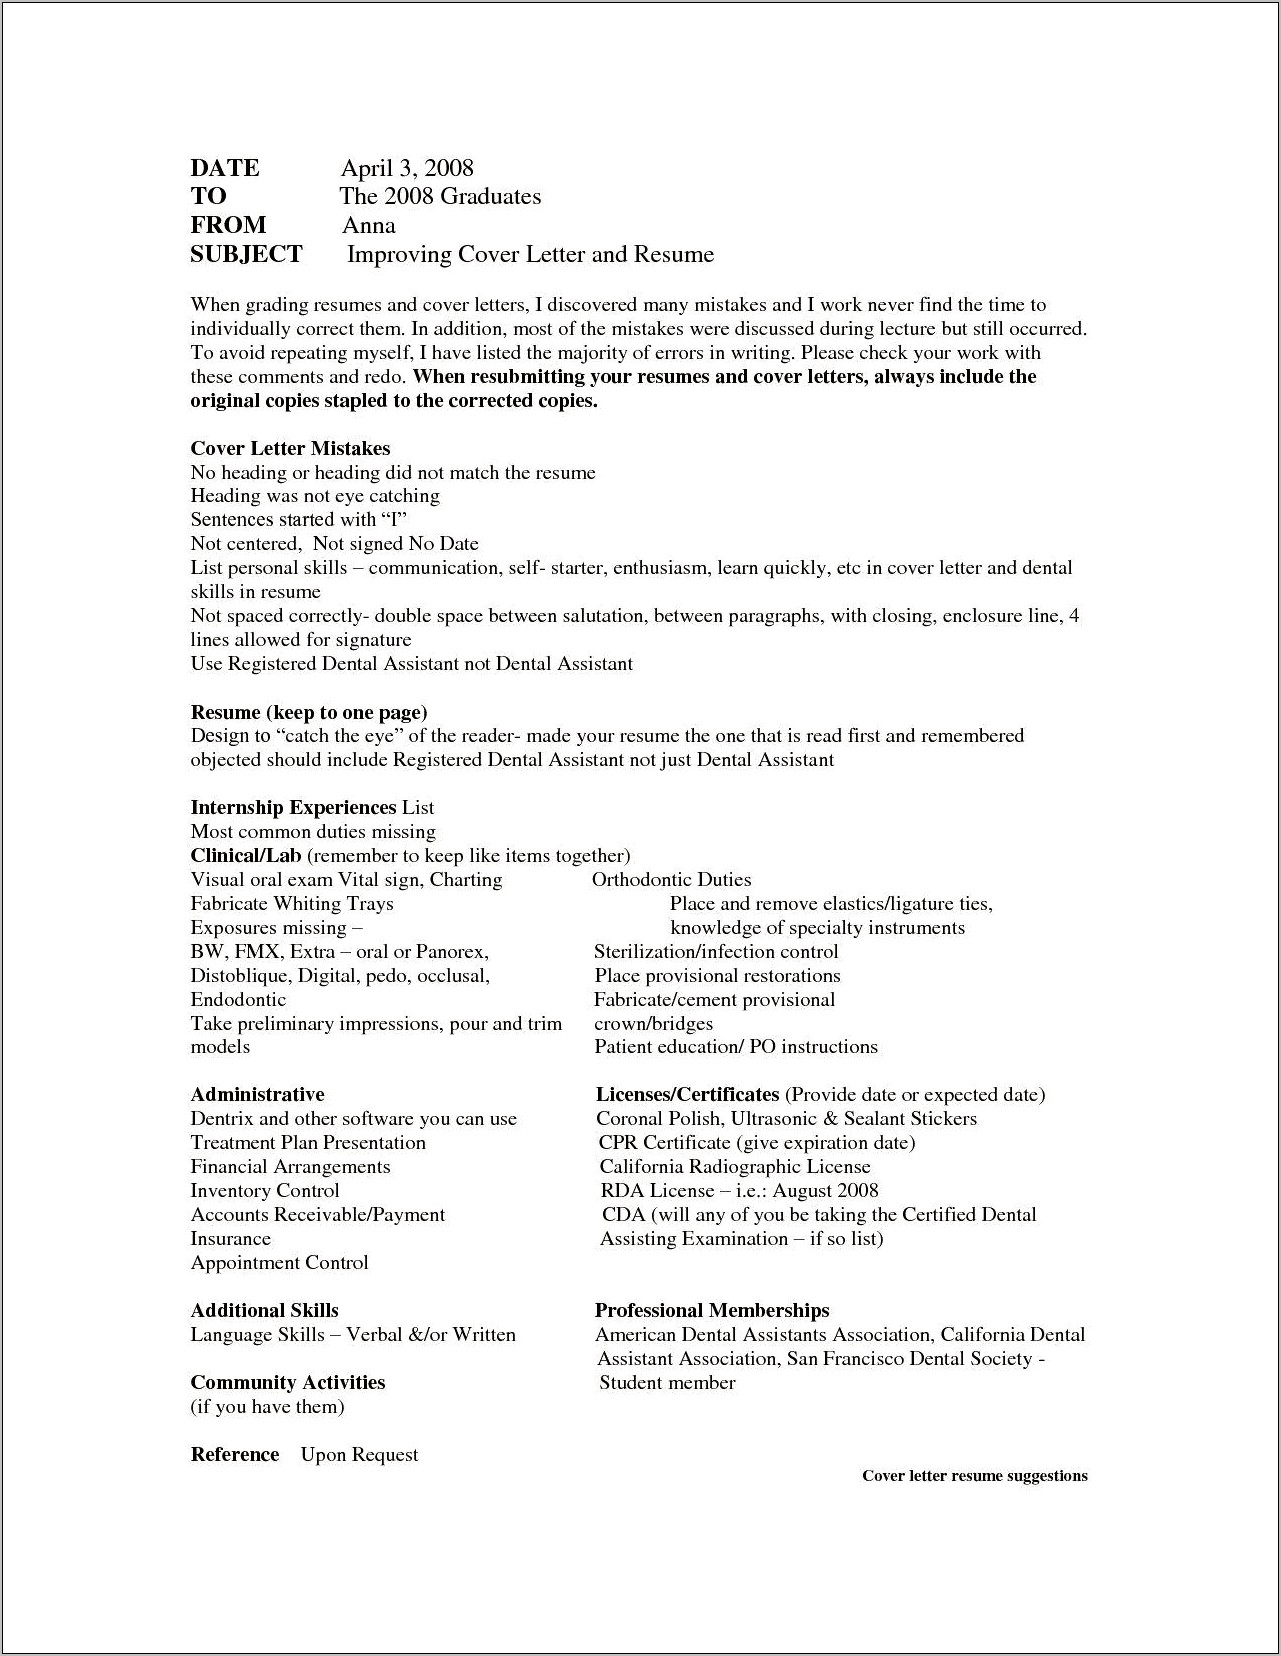 Example Of Dental Assistant Resume With No Experience